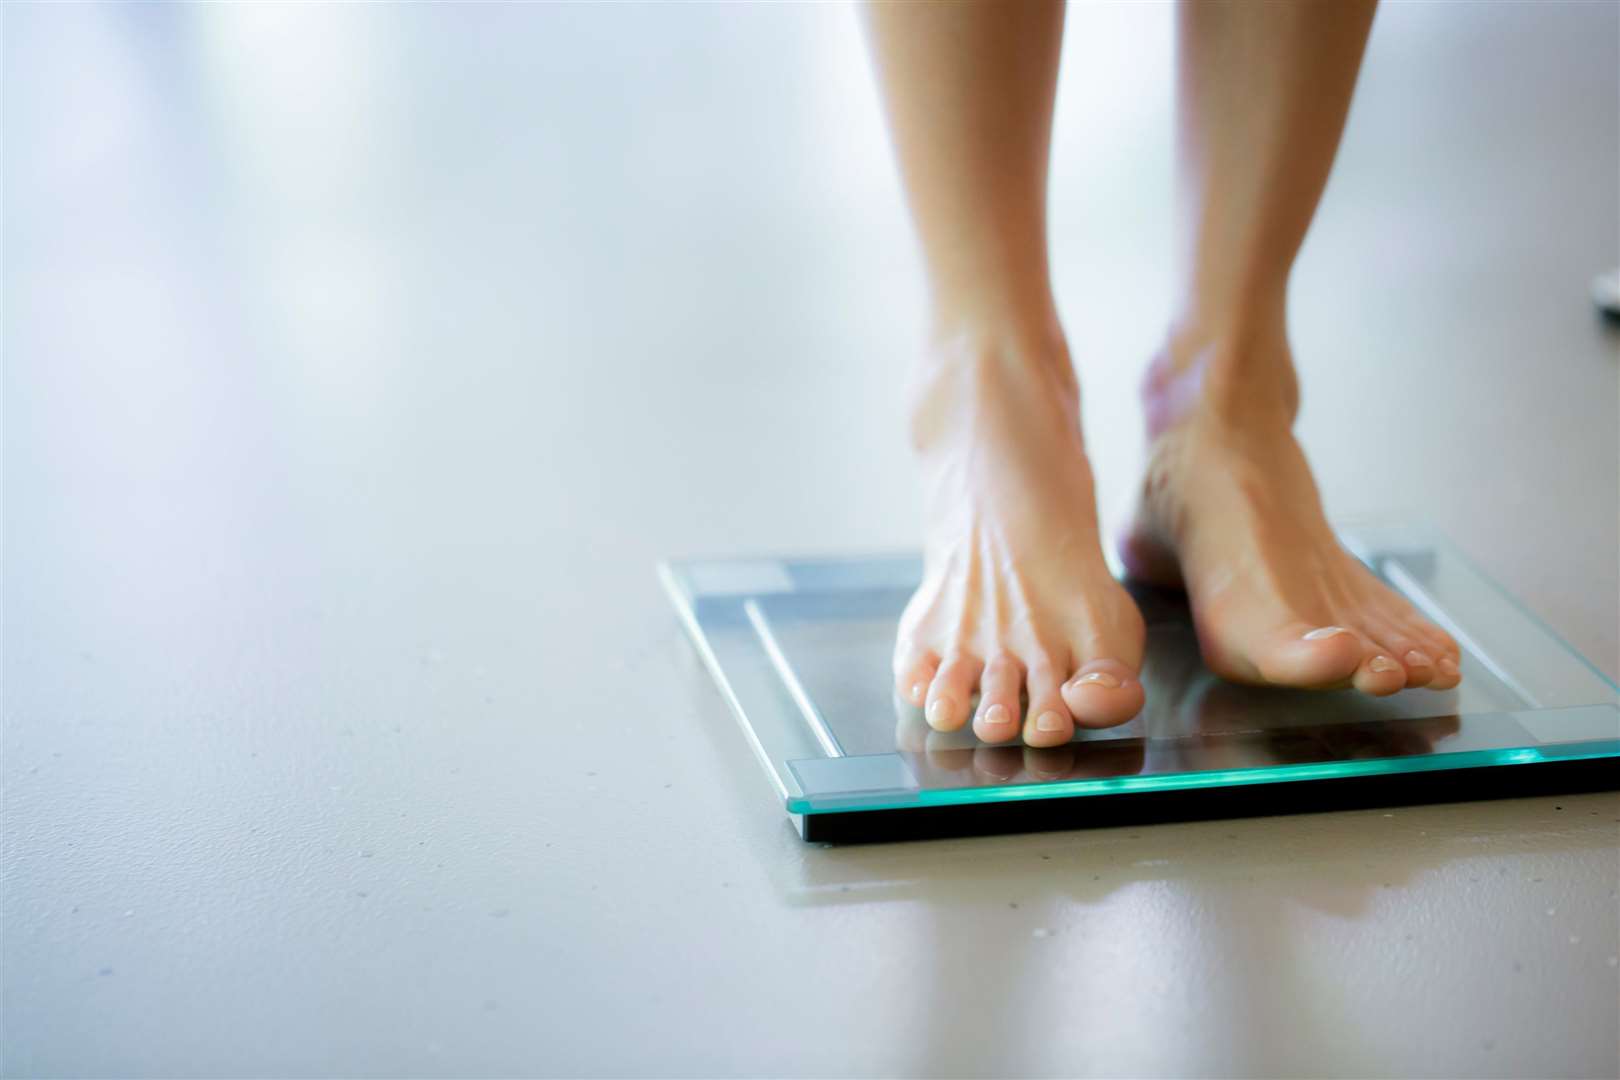 Sidonie found it difficult to loose weight despite her best efforts. Stock image: ShotShare